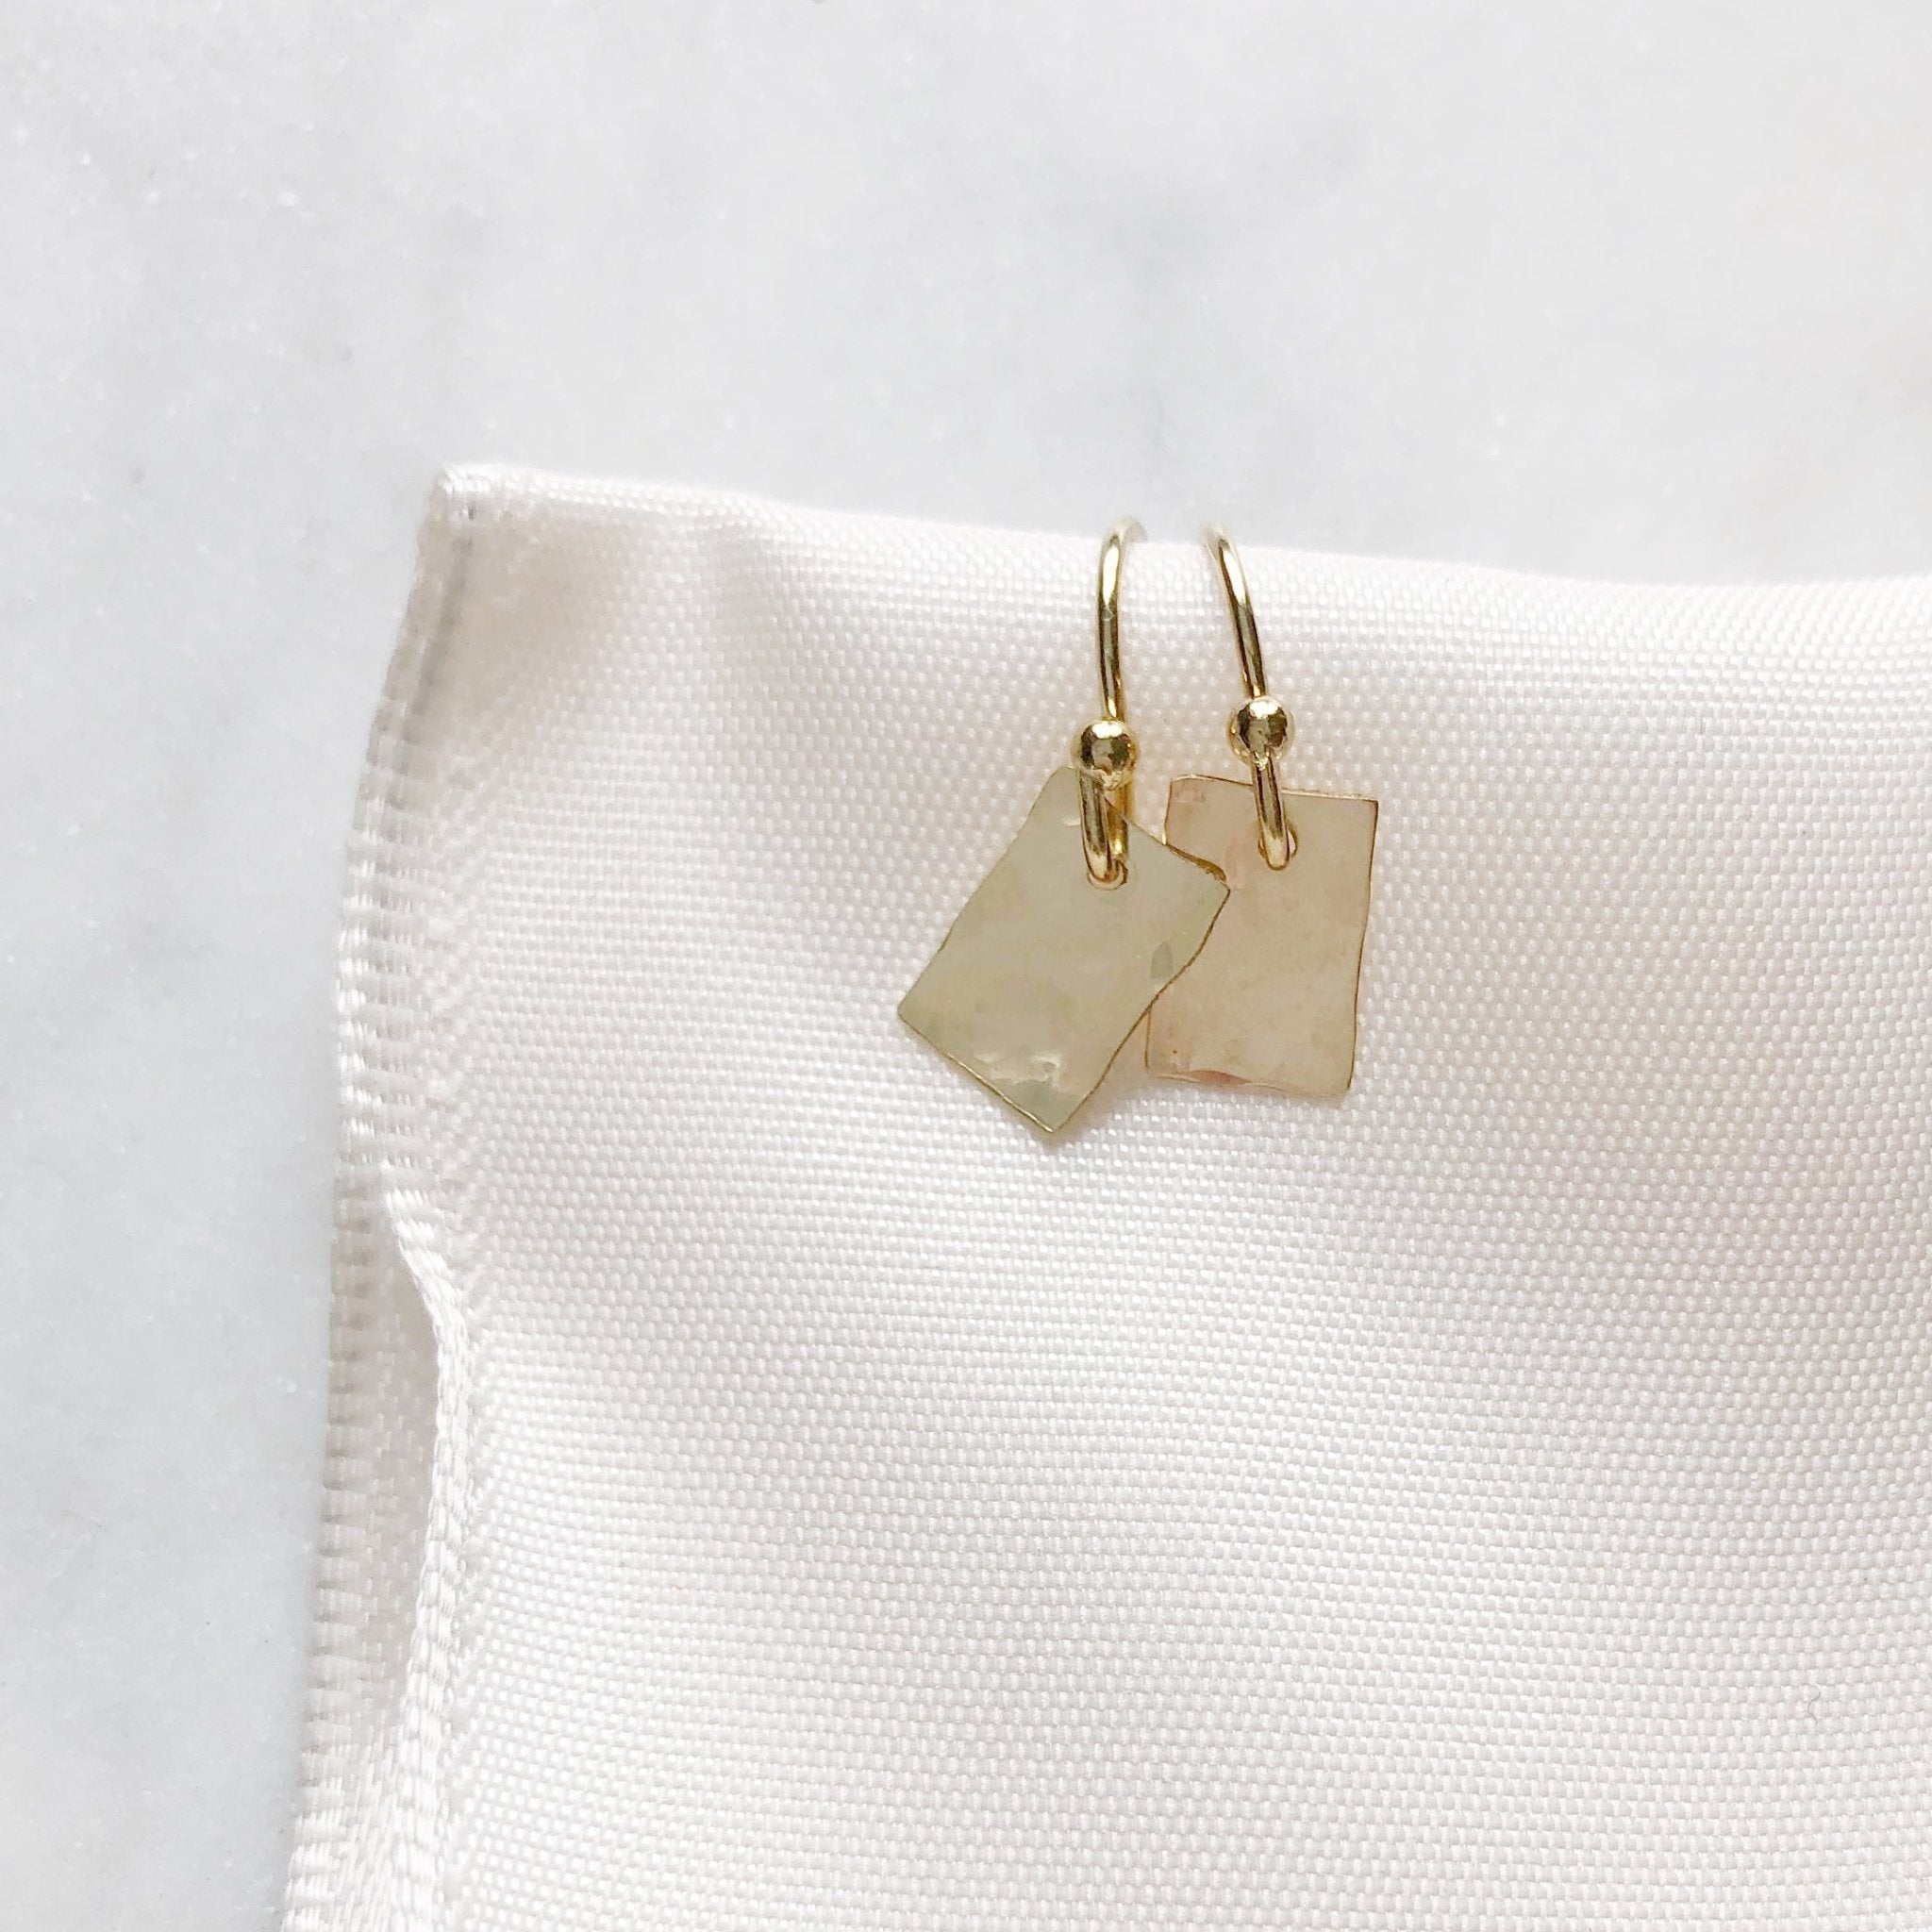 Gold Lordes Earrings by Sarah Cornwell Jewelry. Dainty, shimmery, gold textured rectangle earrings on a white background.